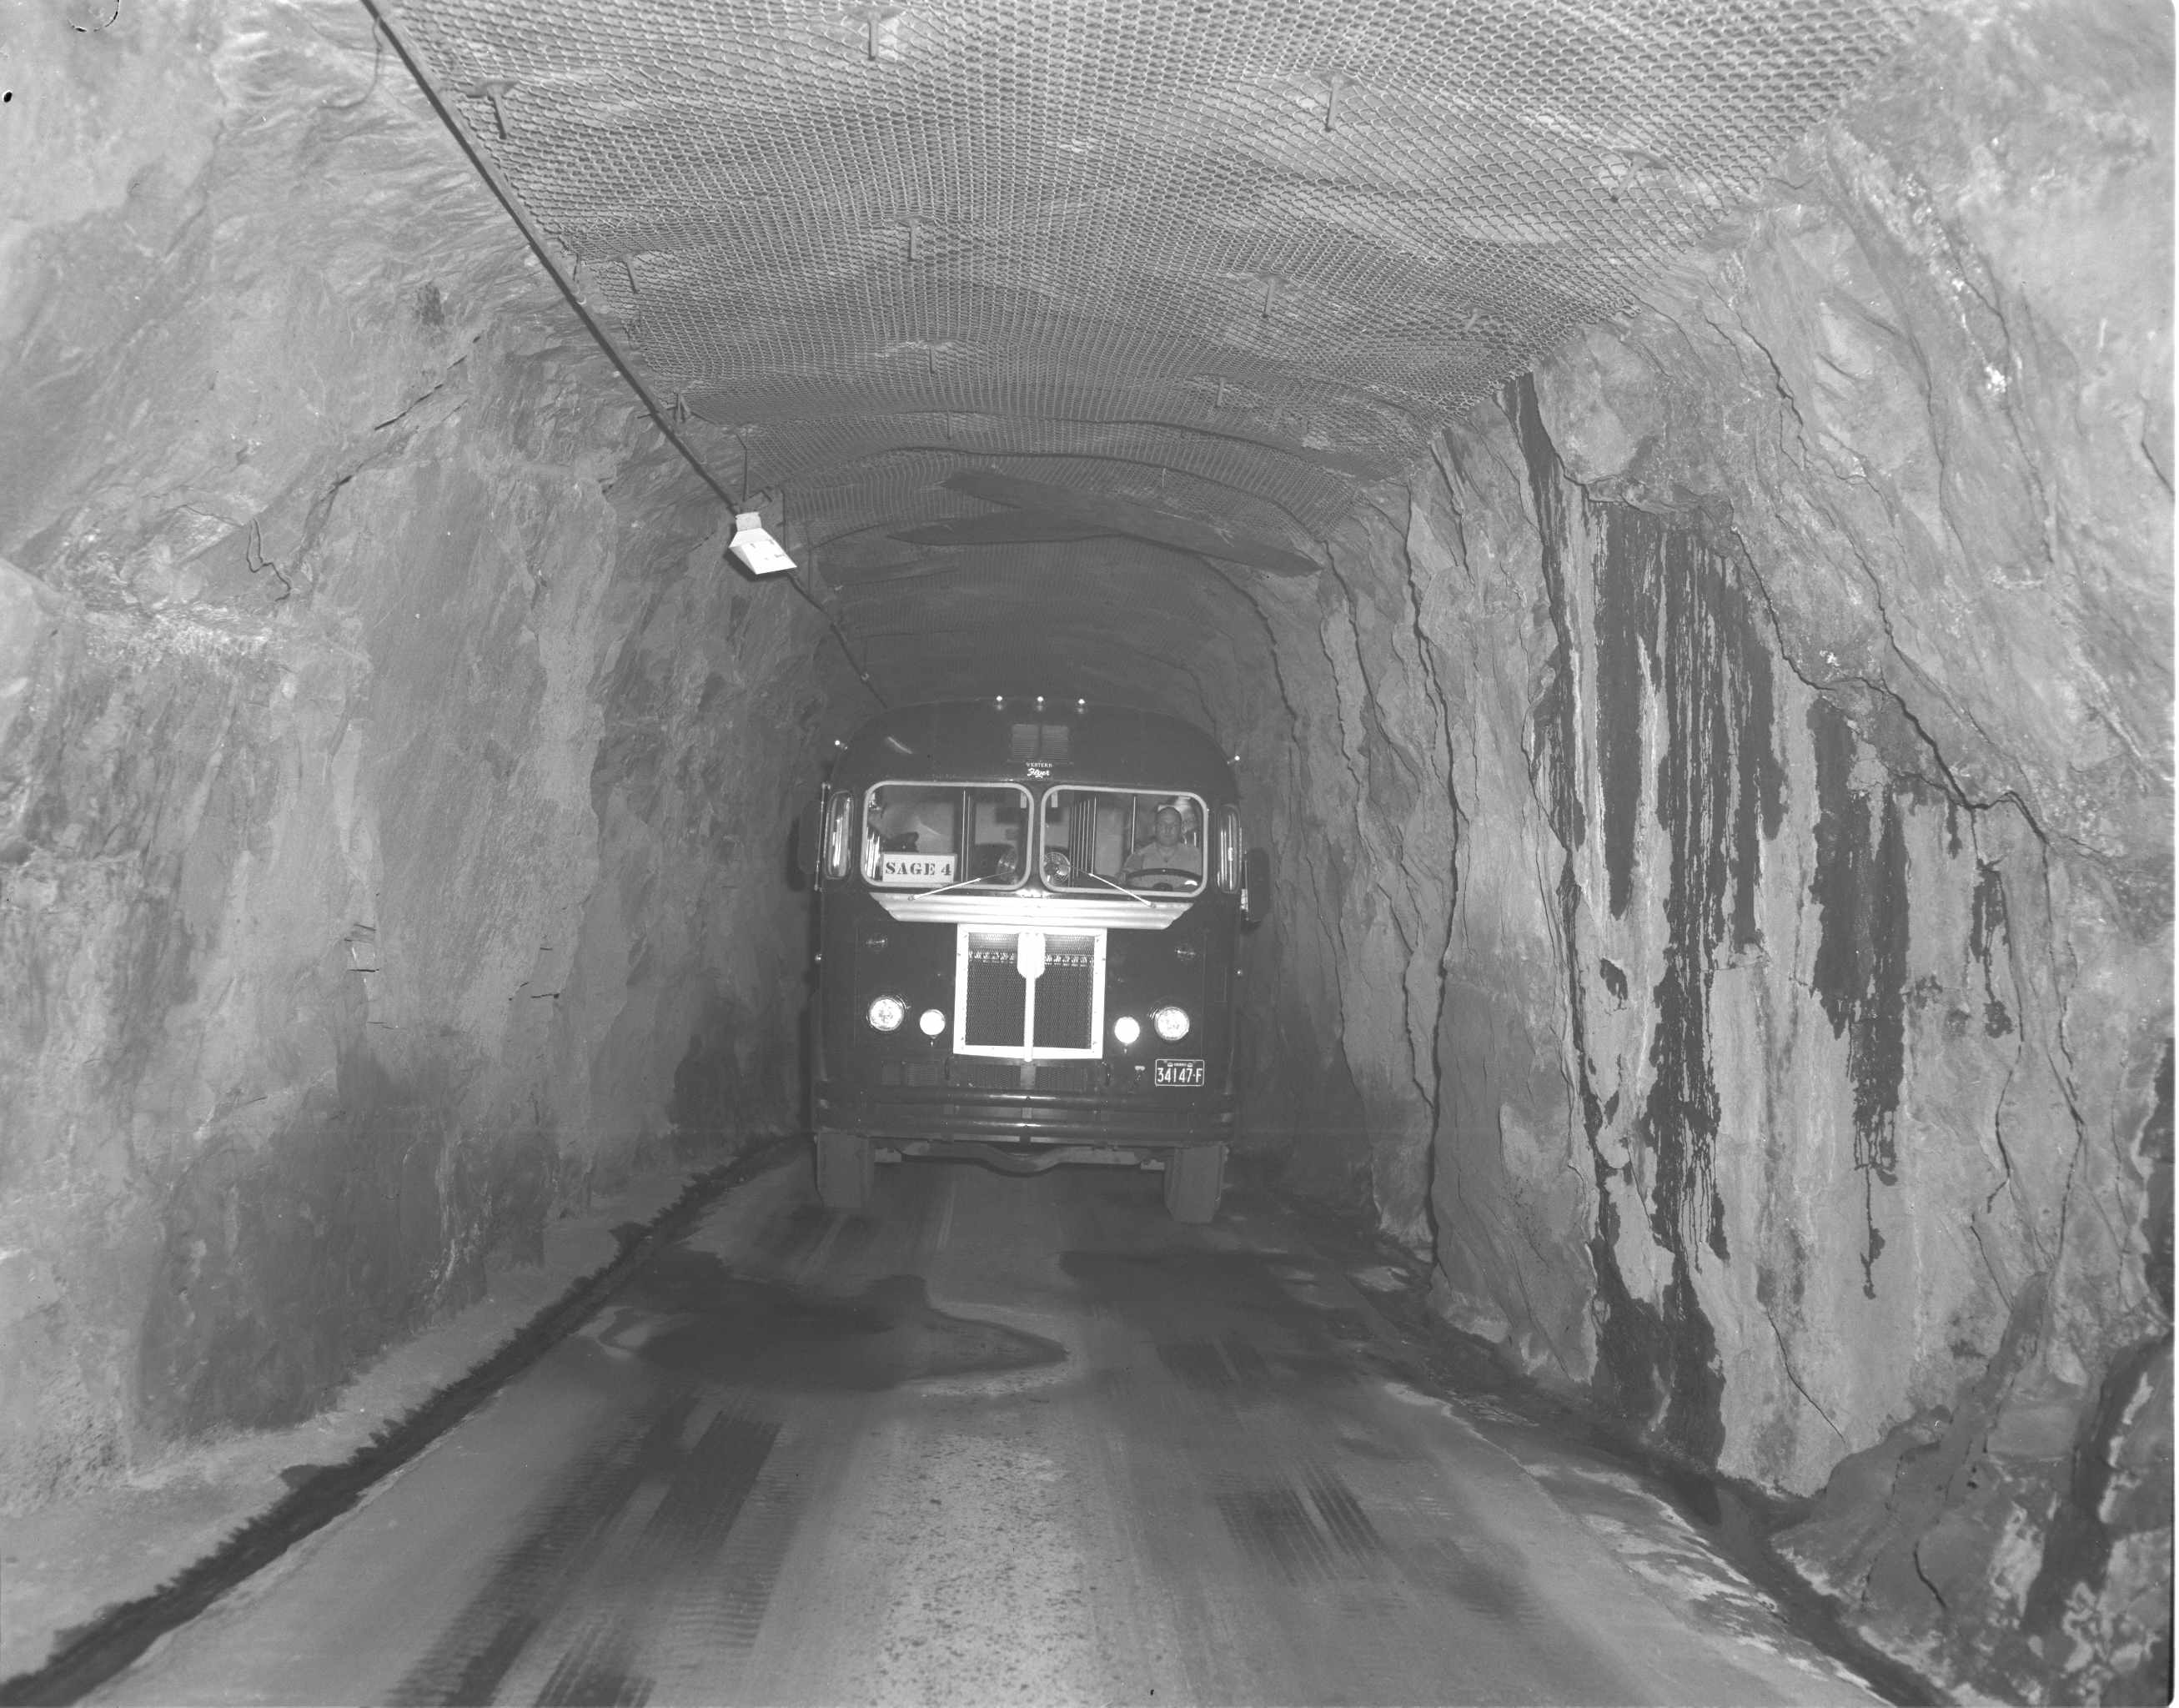 A bus travels down one of two narrow tunnels used to access the NORAD facility 600 feet below the surface.   